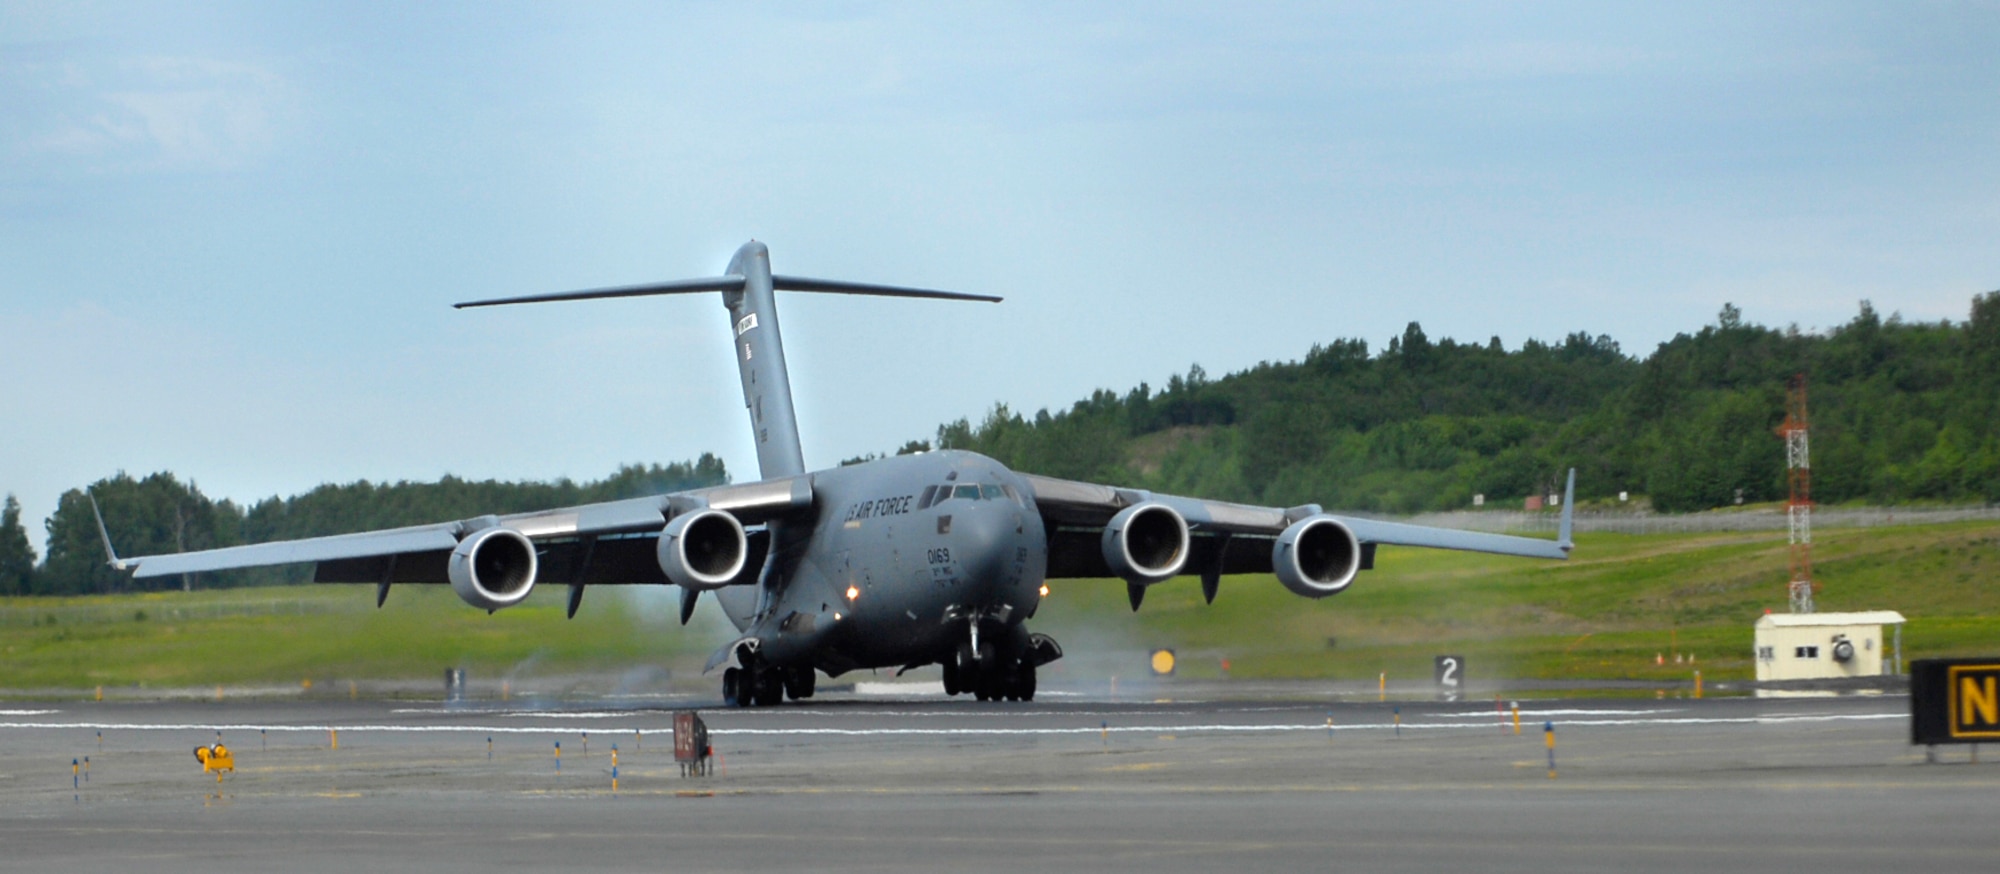 The C-17 Globemaster III "Spirit of Denali" touches down for the first time June 11 at its new home at Elmendorf Air Force Base, Alaska. "Spirit of Denali" is the first C-17 of eight to arrive at Elmendorf AFB. (U.S. Air Force photo/Airman 1st Class Tinese Treadwell)